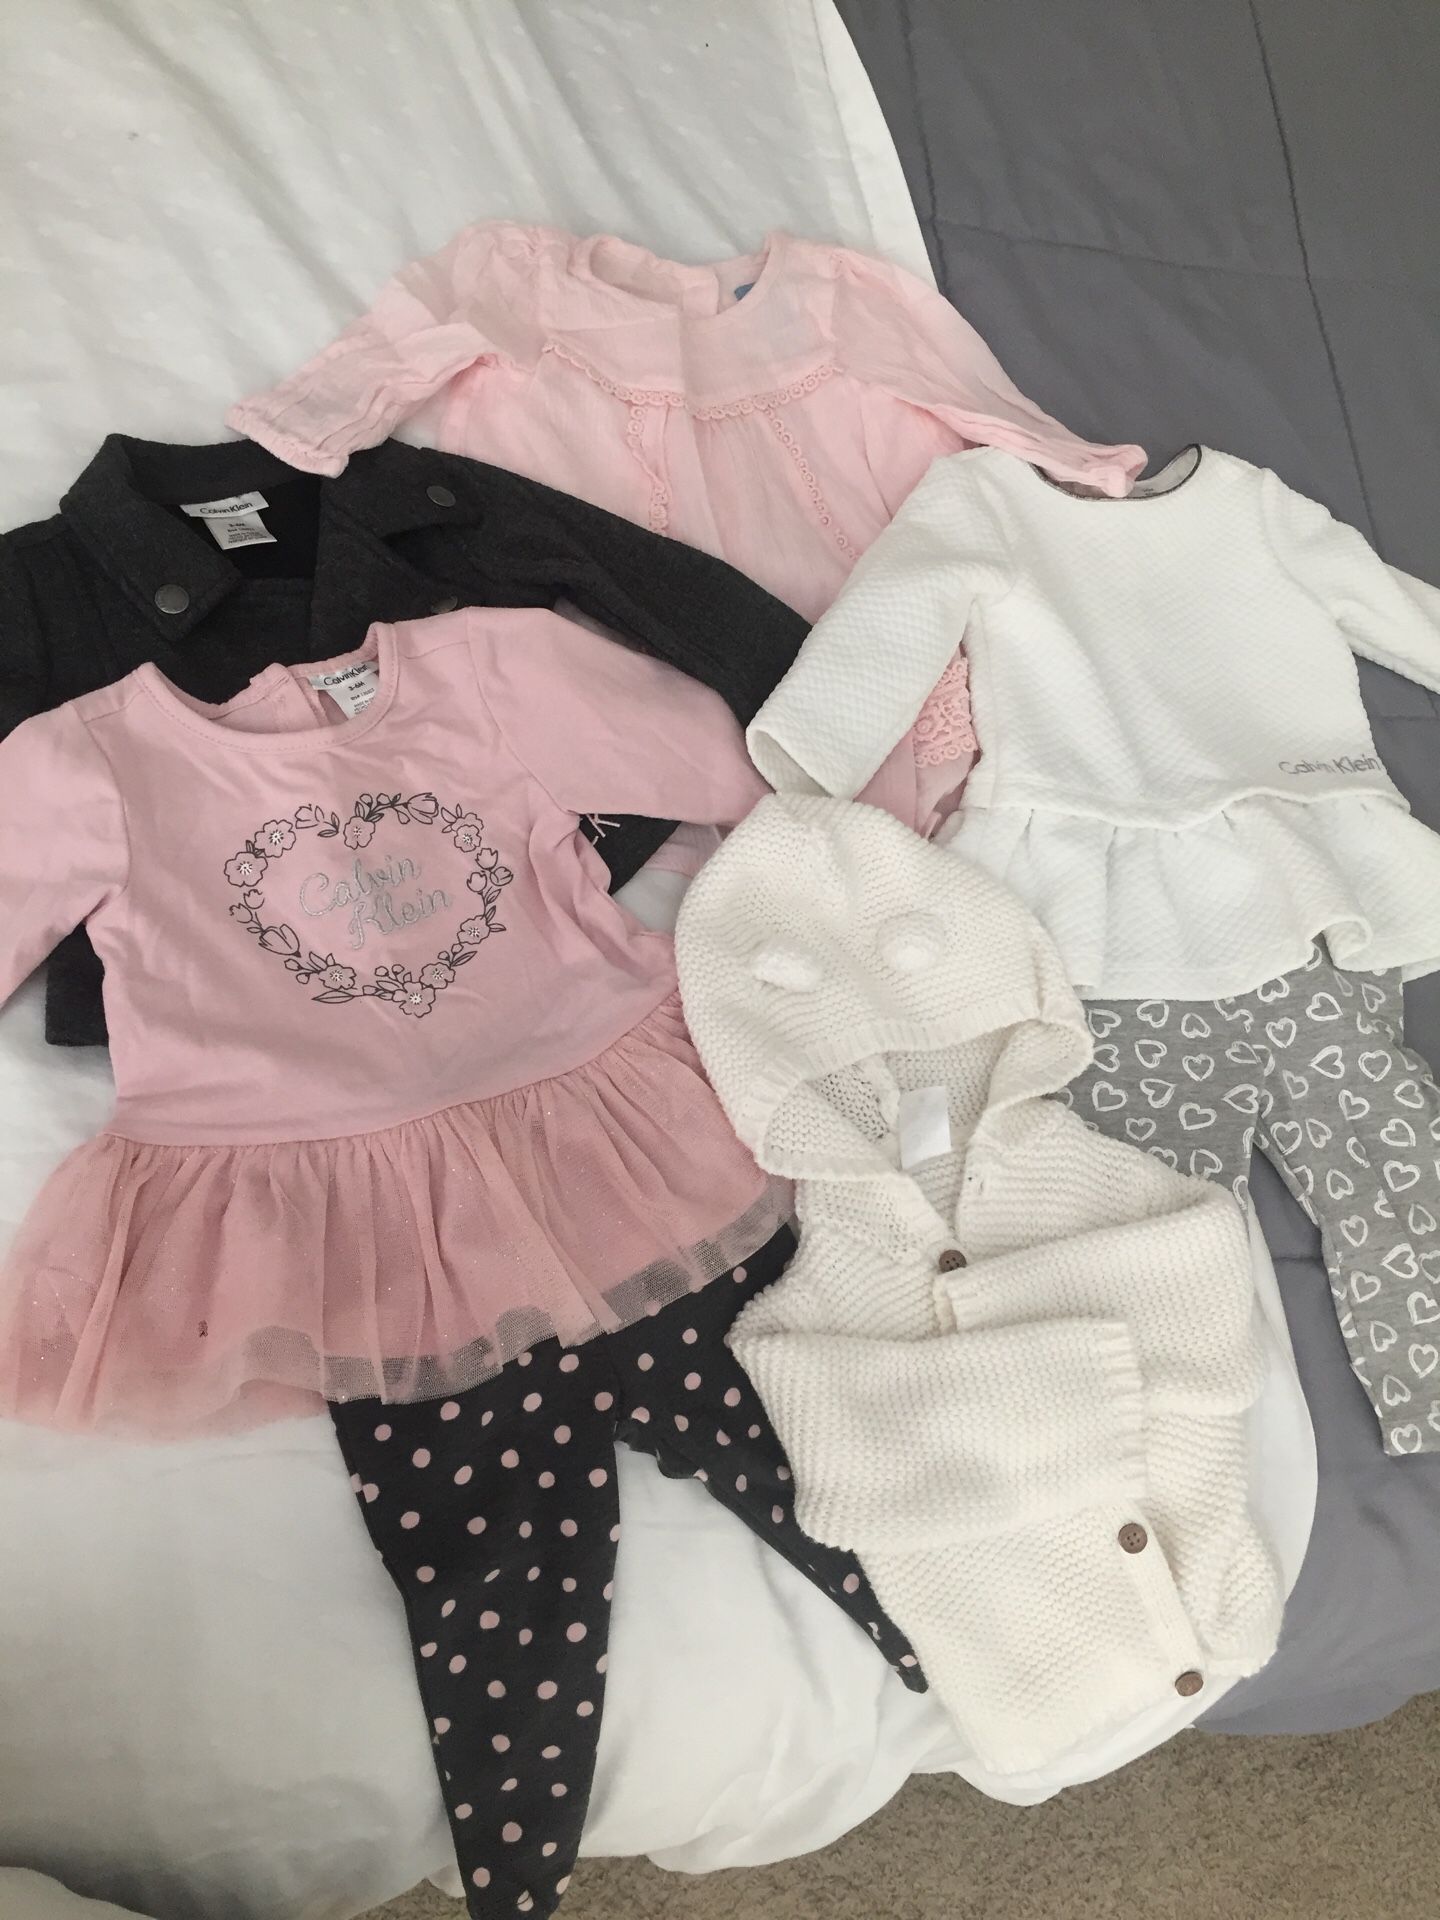 Calvin Klein, Baby Gap, and Carters brand Girls Clothing 3-6 Months